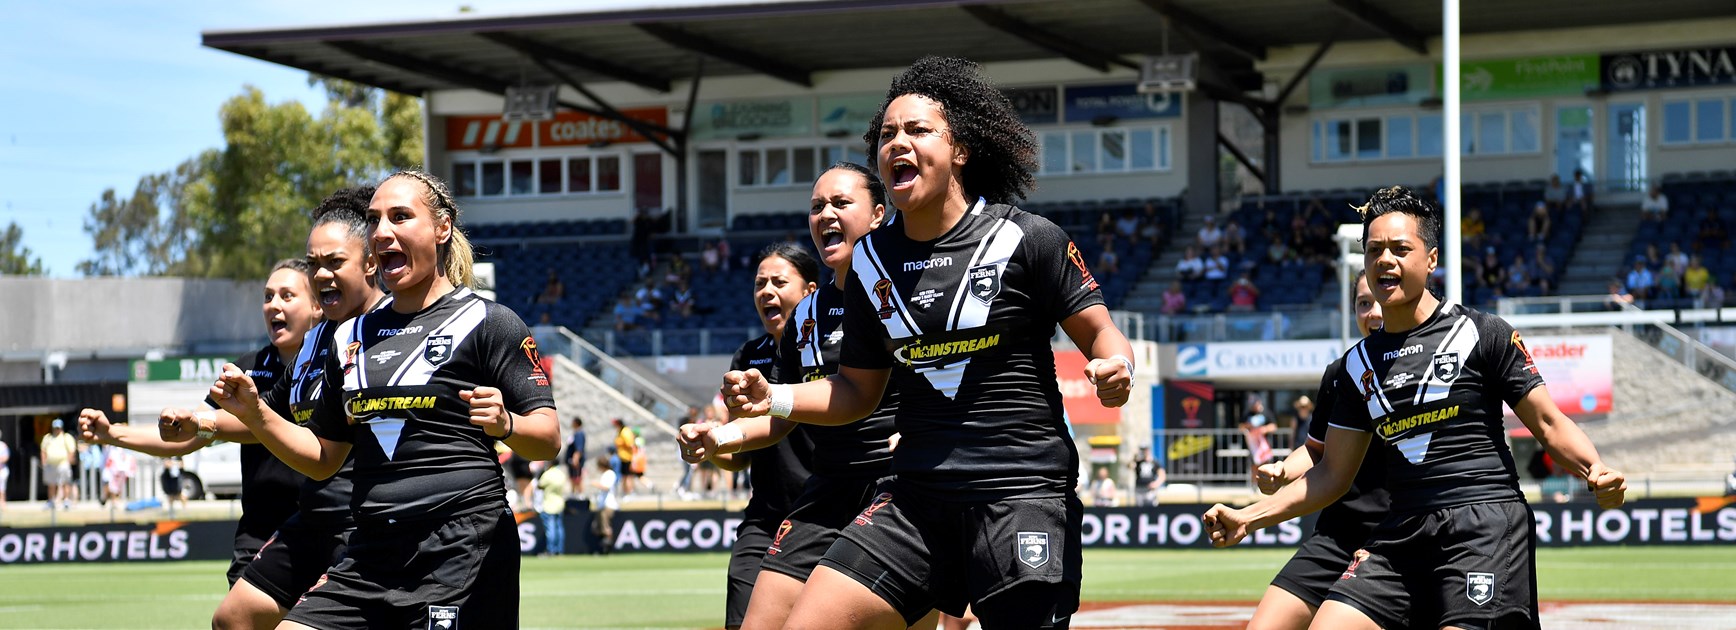 The Kiwi Ferns at the 2017 Women's Rugby League World Cup.